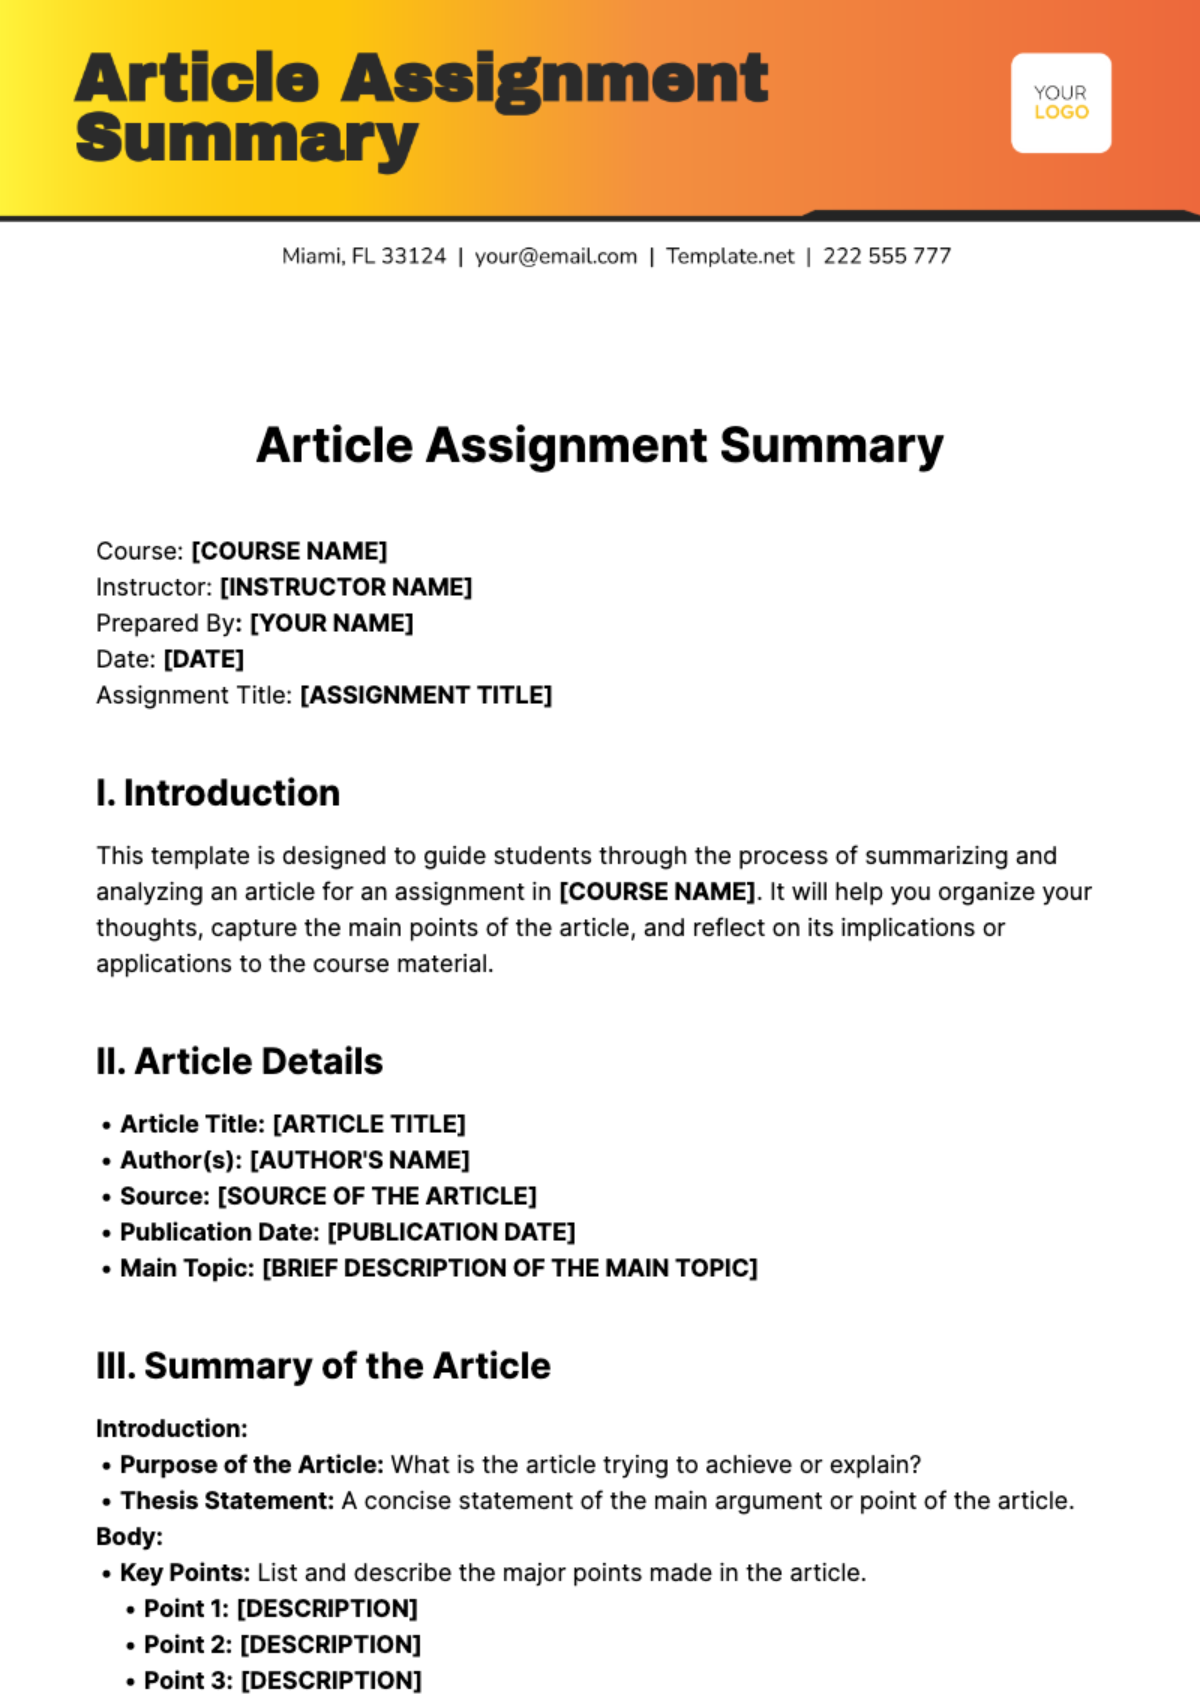 Article Assignment Summary Template